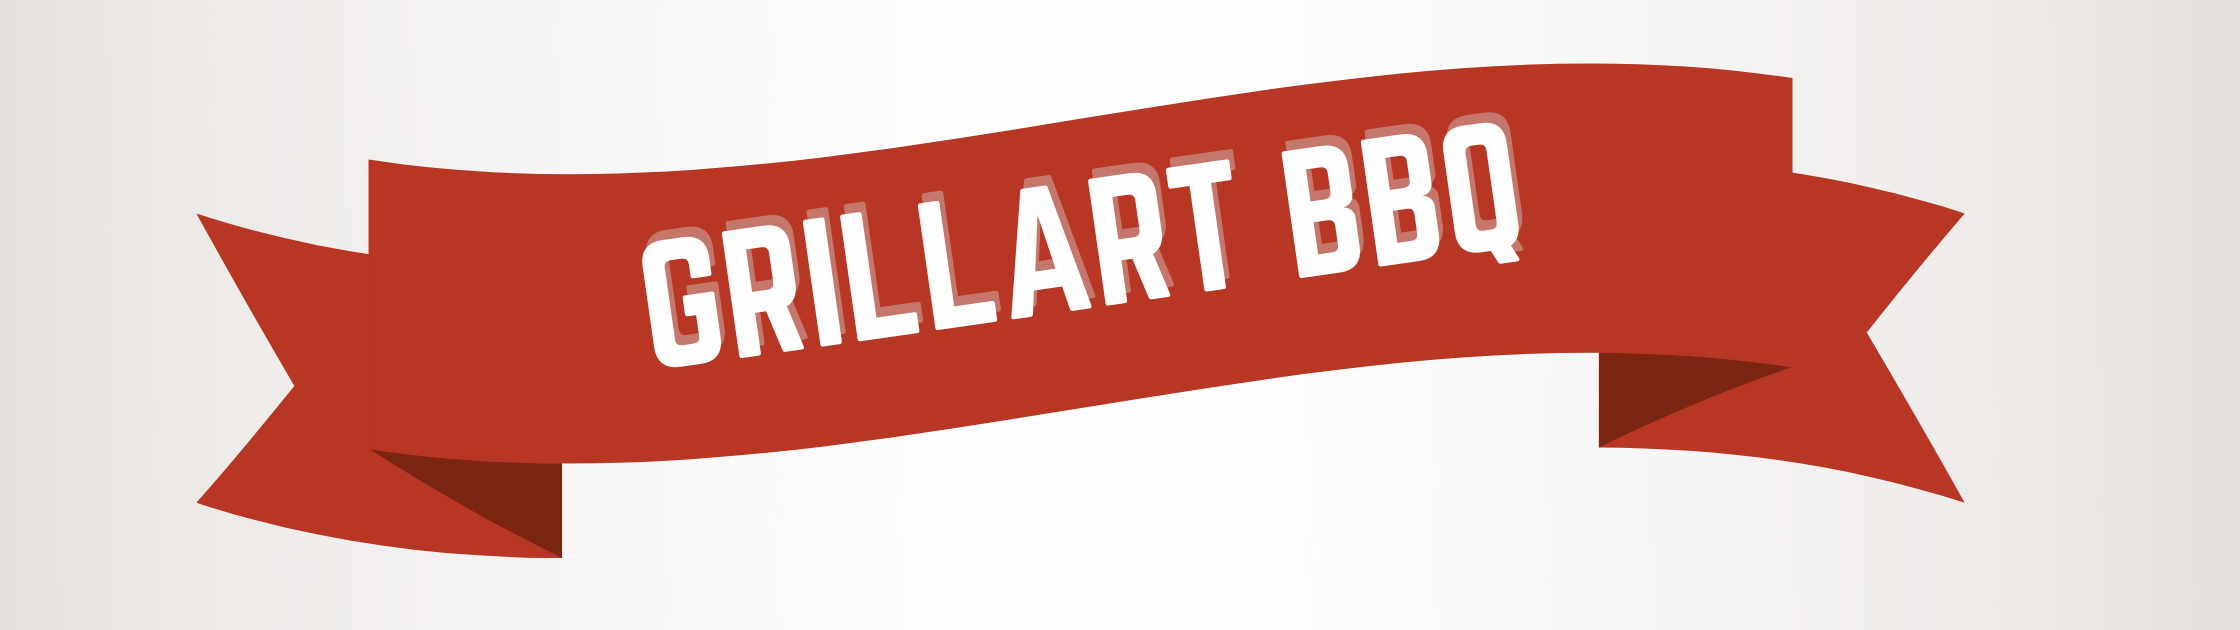 GRILLART BBQ on red holiday banner